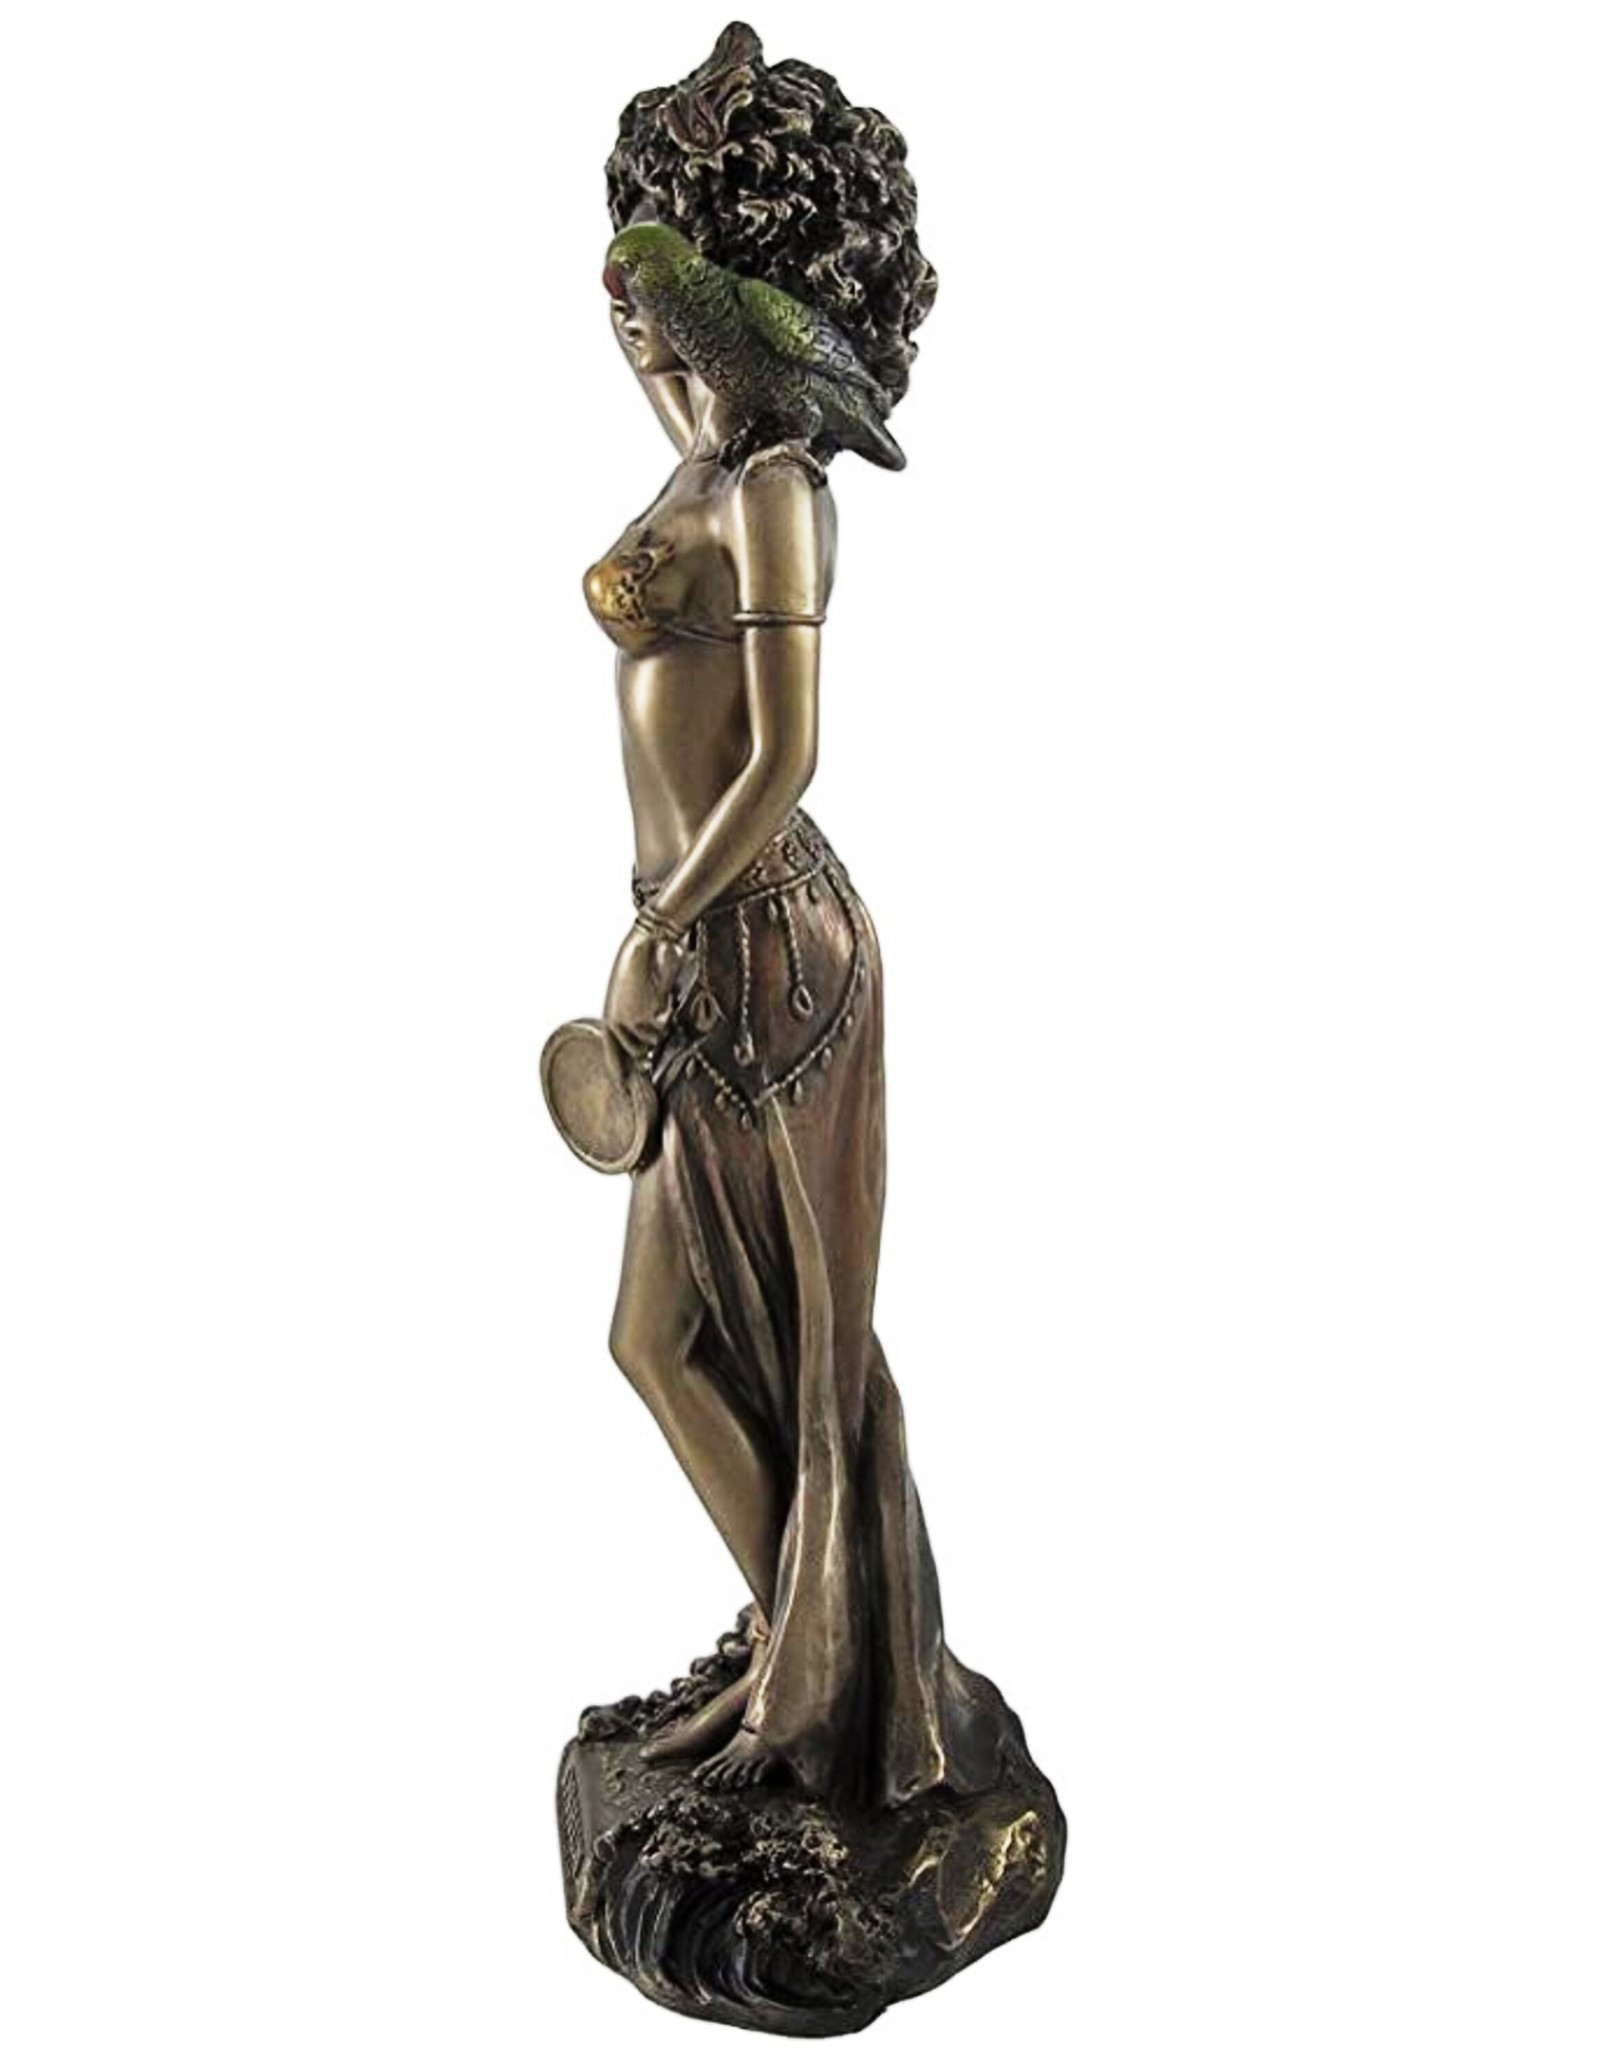 Veronese Design Giftware Figurines Collectables - Oshun African Goddess of Love, Beauty and Sweet Waters